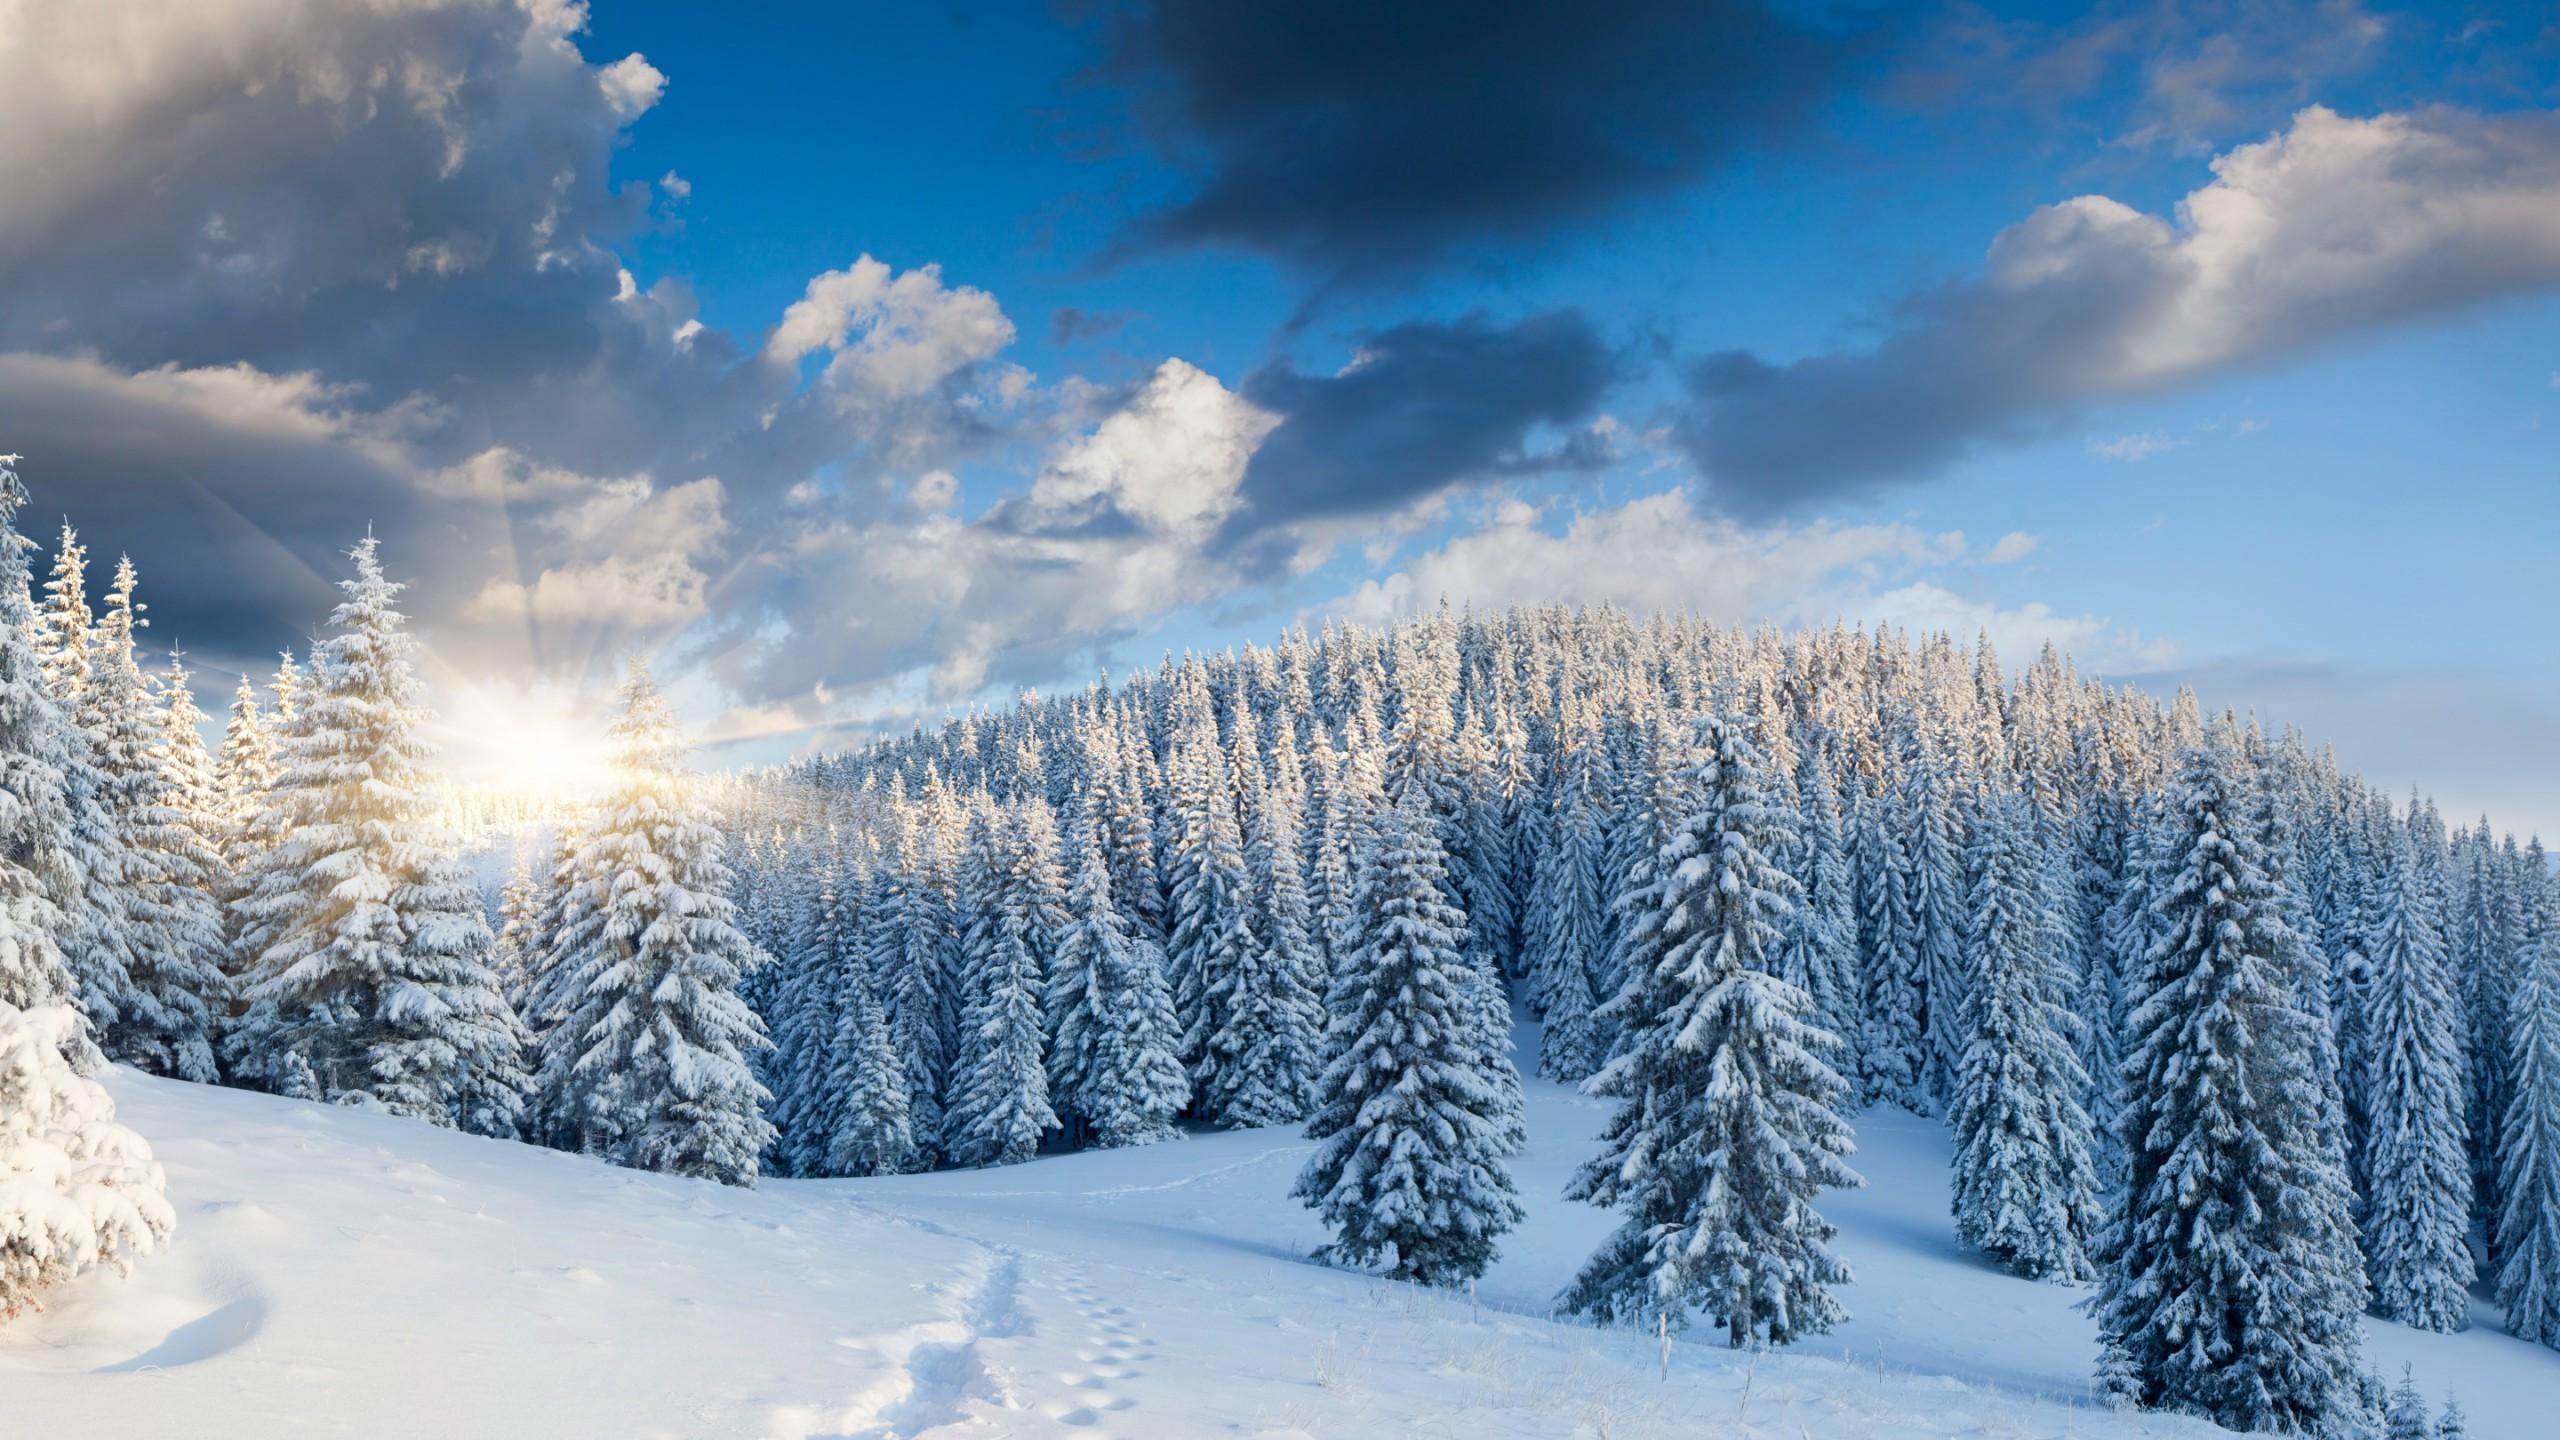 Download wallpaper 3840x2160 forest, snow, trees, snowy, winter 4k uhd 16:9  hd background